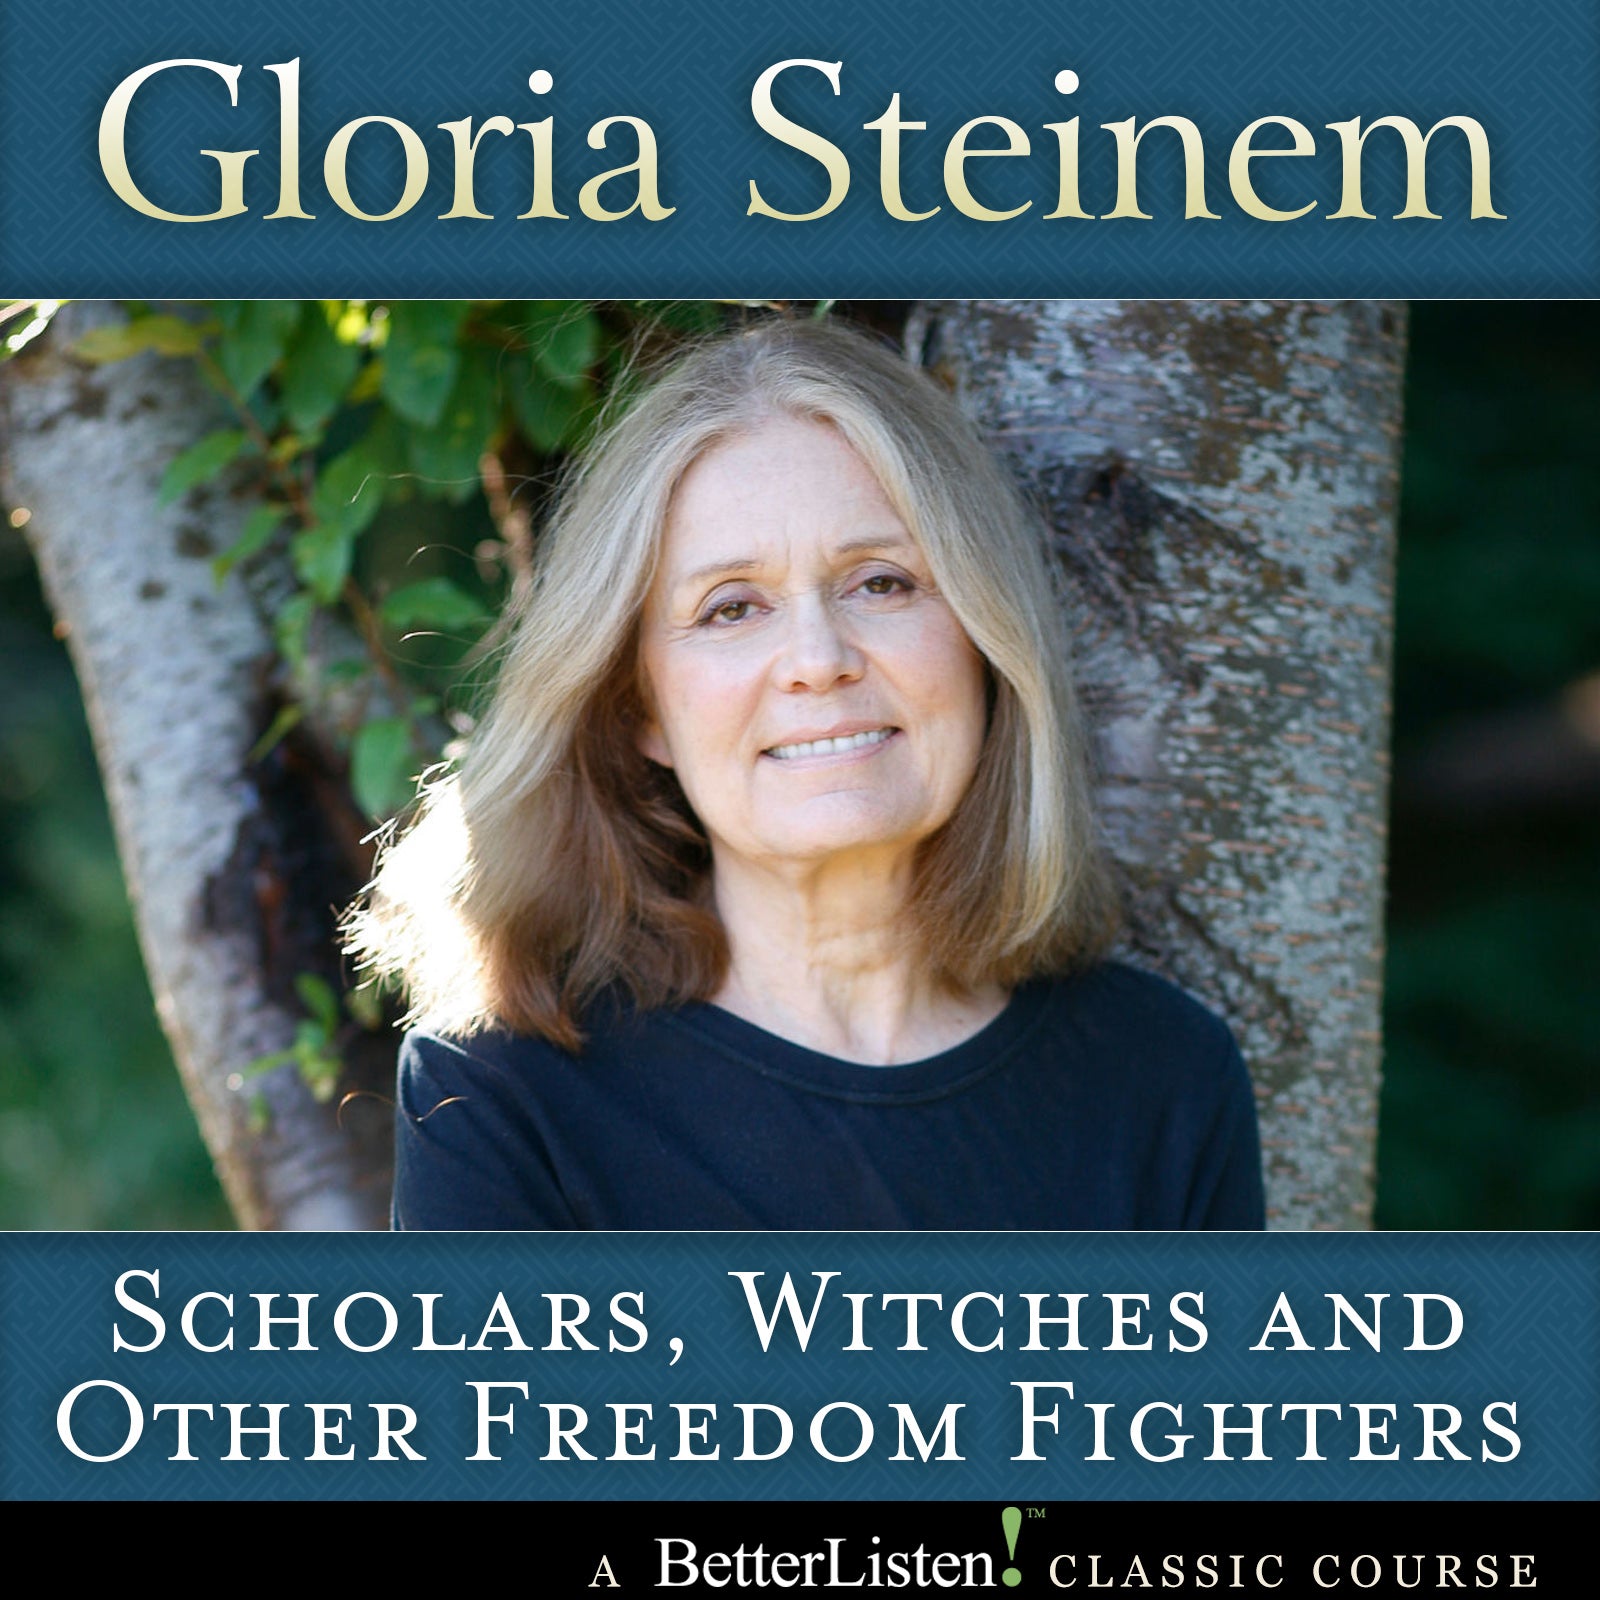 Scholars, Witches and Other Freedom Fighters by Gloria Steinem